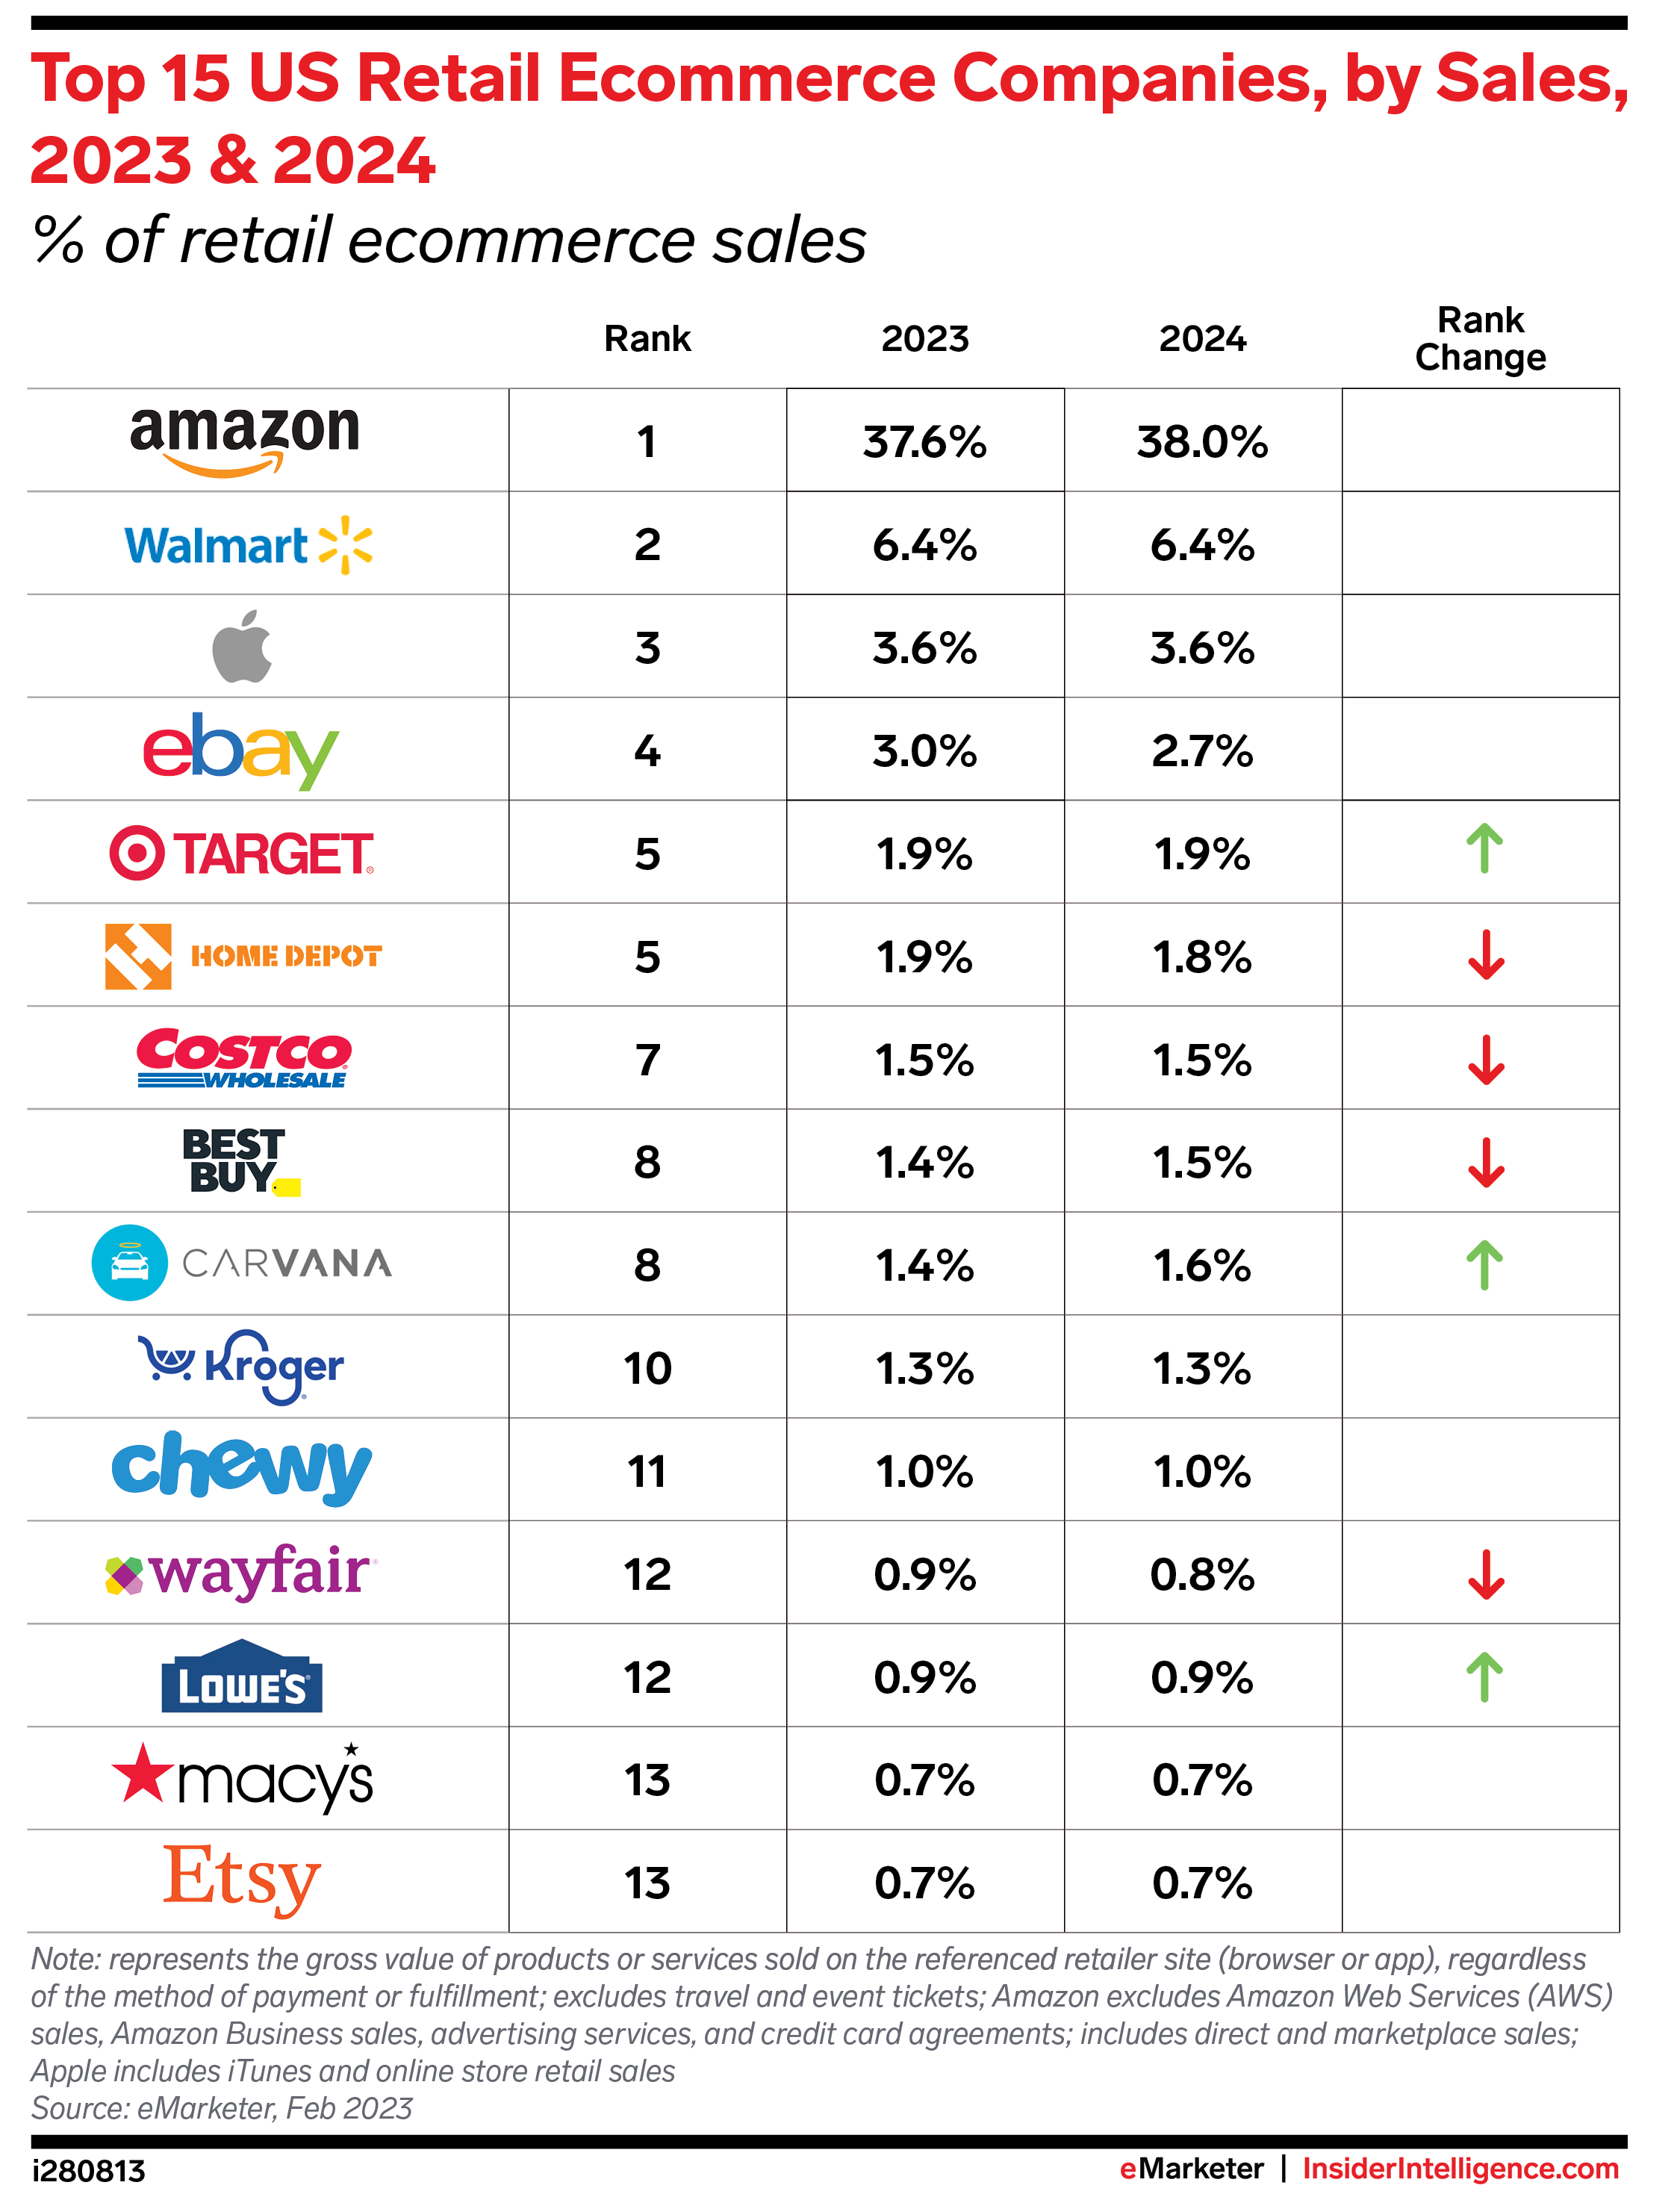 Top 15 US Sales Ecommerce Companies, by Sales, 2023-2024 (% of retail ecommerce sales)